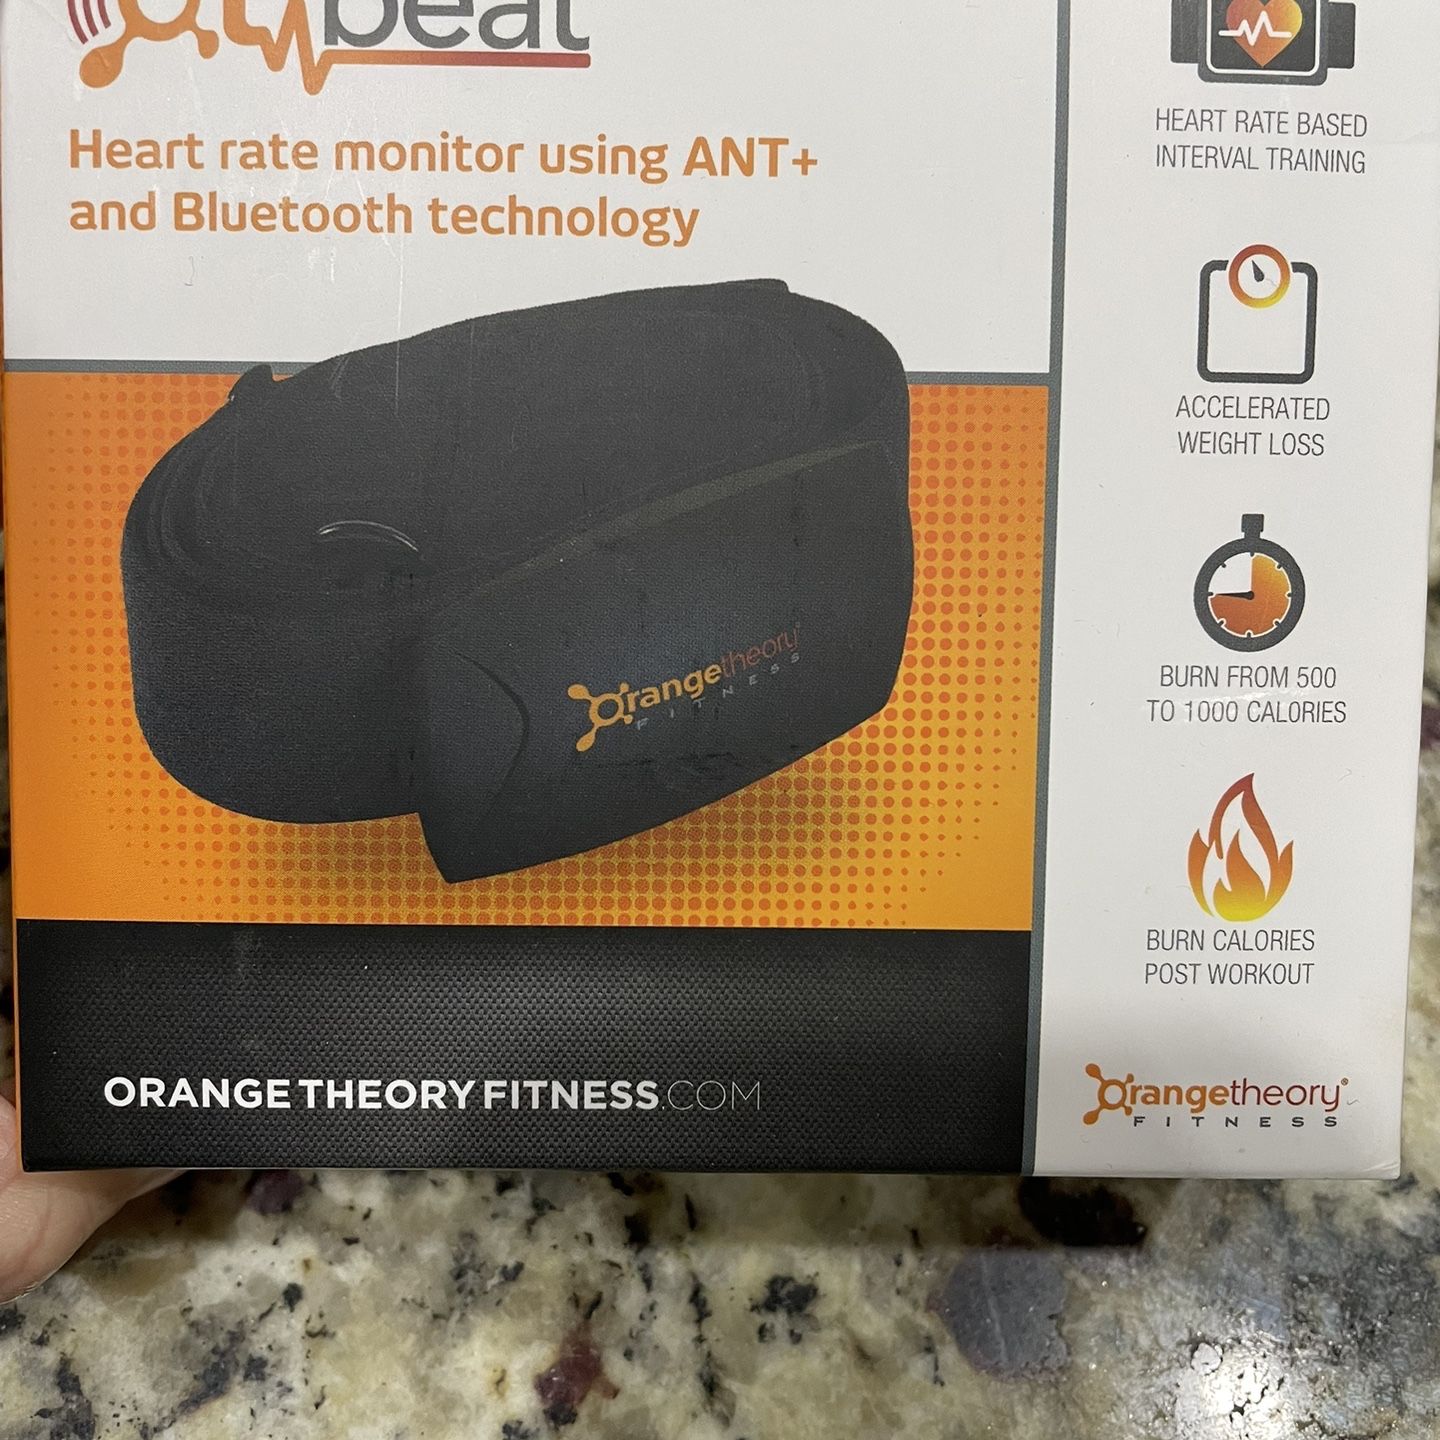 Costco] Orange Theory Fitness Gift Card $129.99 (for 5 training sessions +  1 heart rate monitor) - RedFlagDeals.com Forums